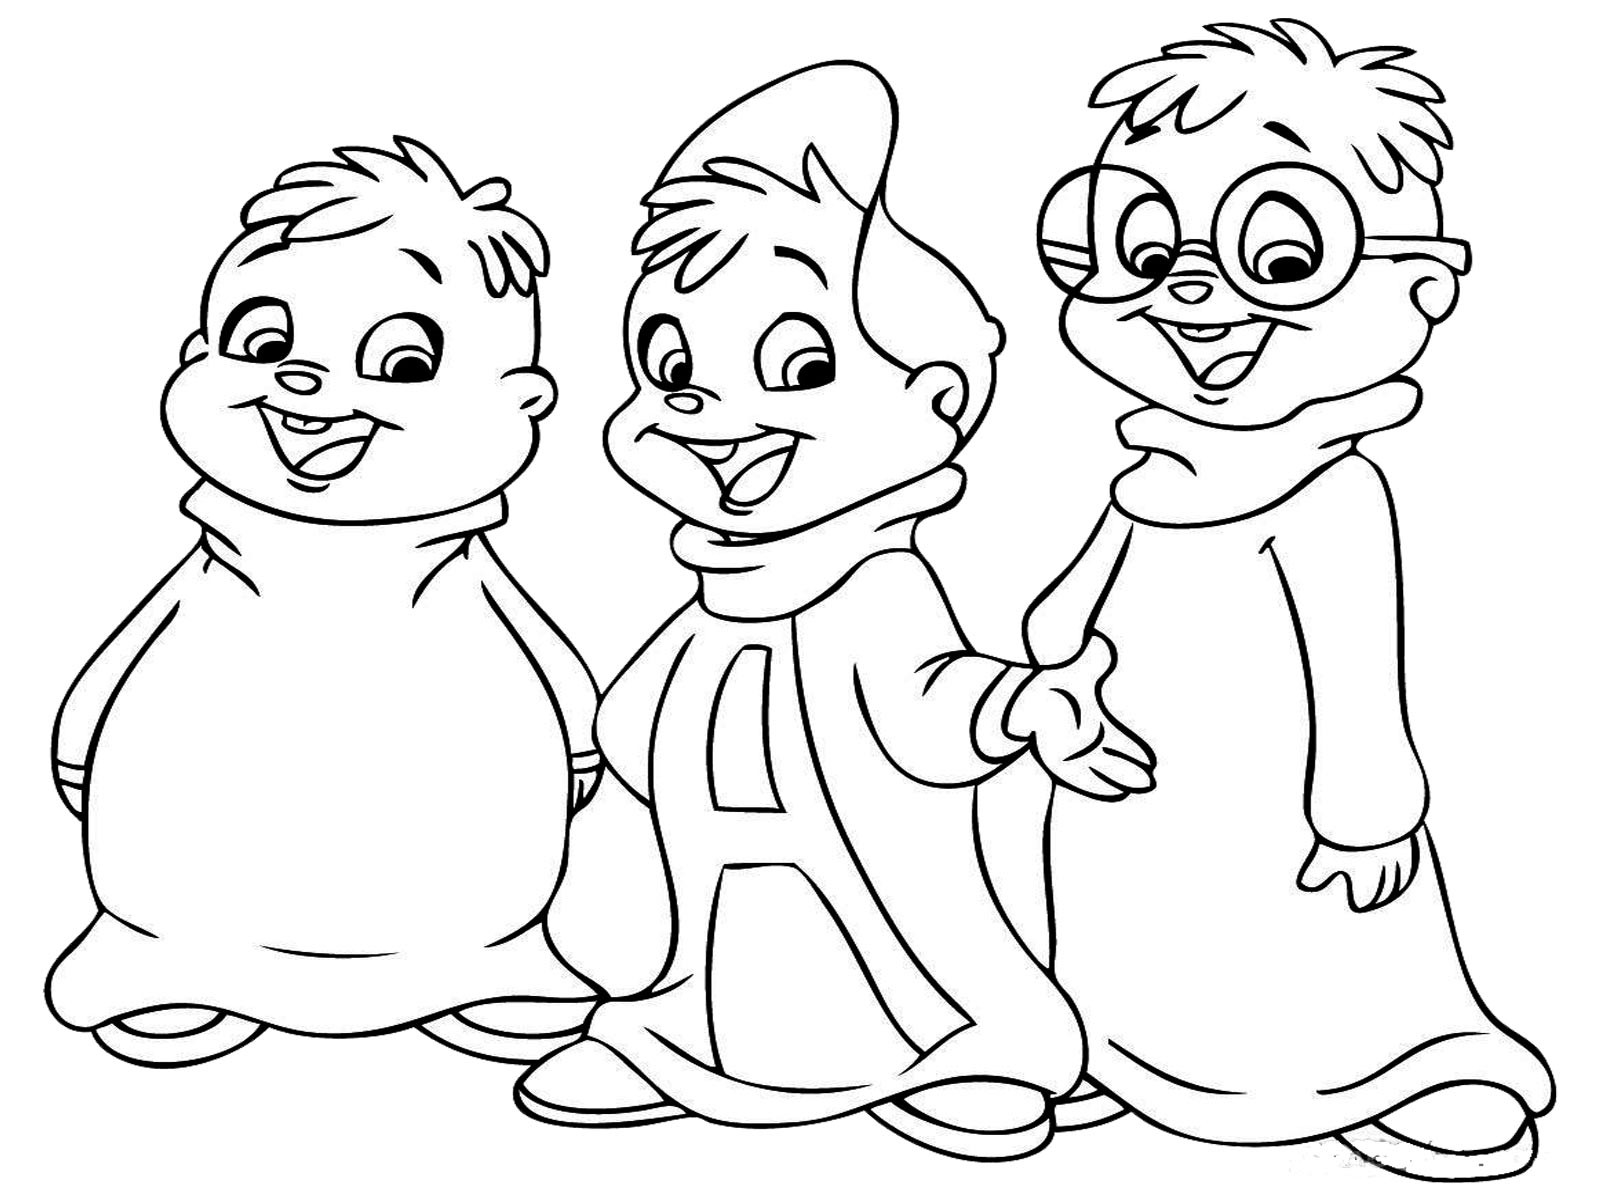 Cool Coloring Sheet For Boys
 Coloring Pages for Boys 2018 Dr Odd